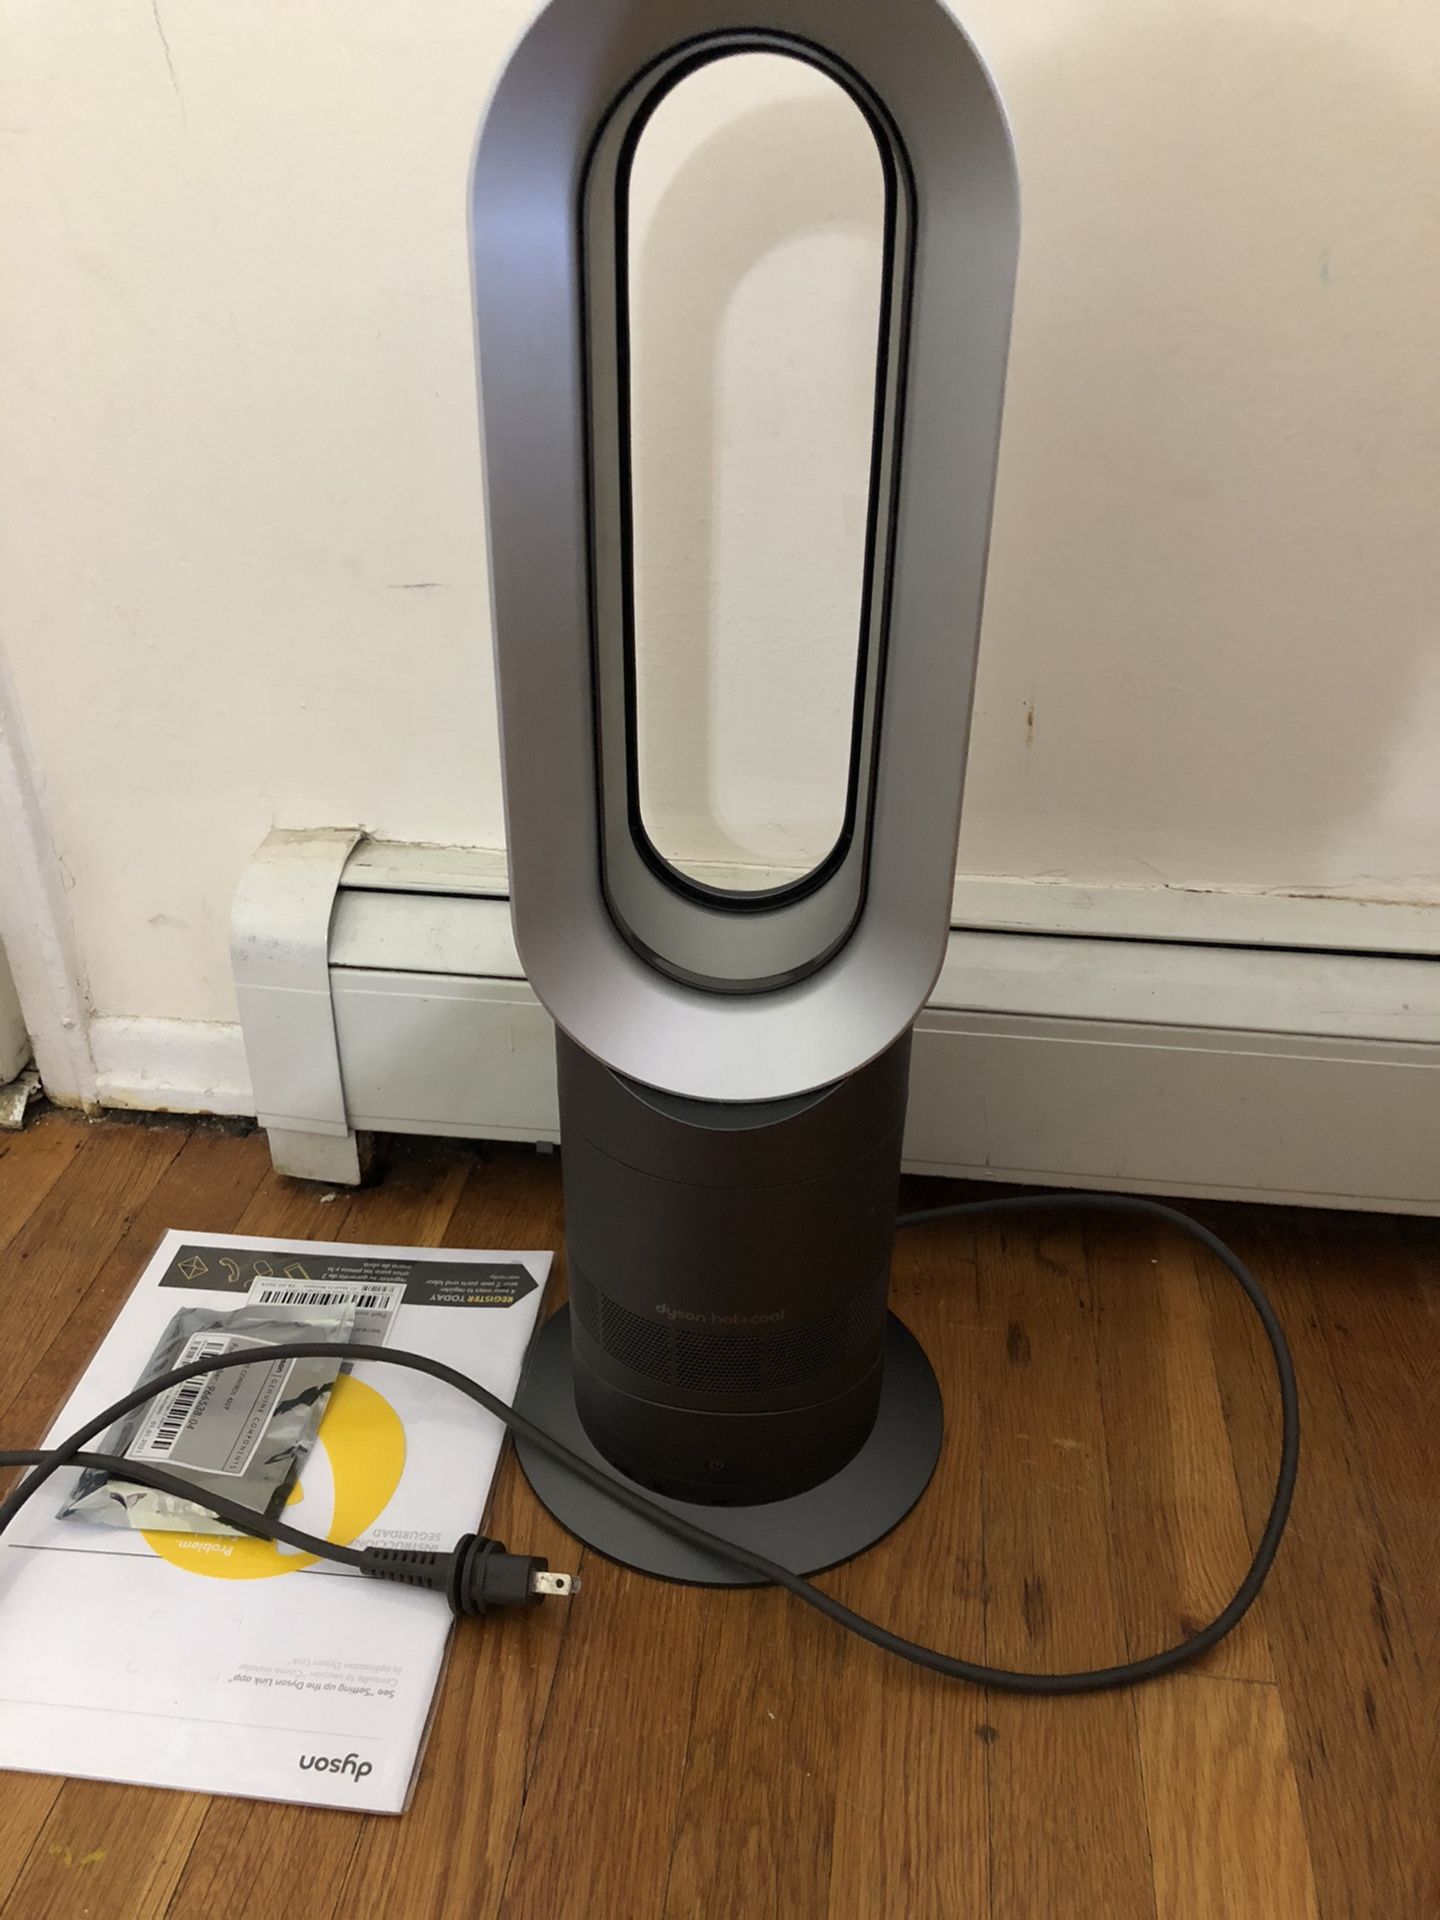 Dyson Hot+Cool Air Multiplier, Jet Focus Fan Heater Grey/Silver - AM09  In very good condition , working perfect  Will ship in non-retail box. 